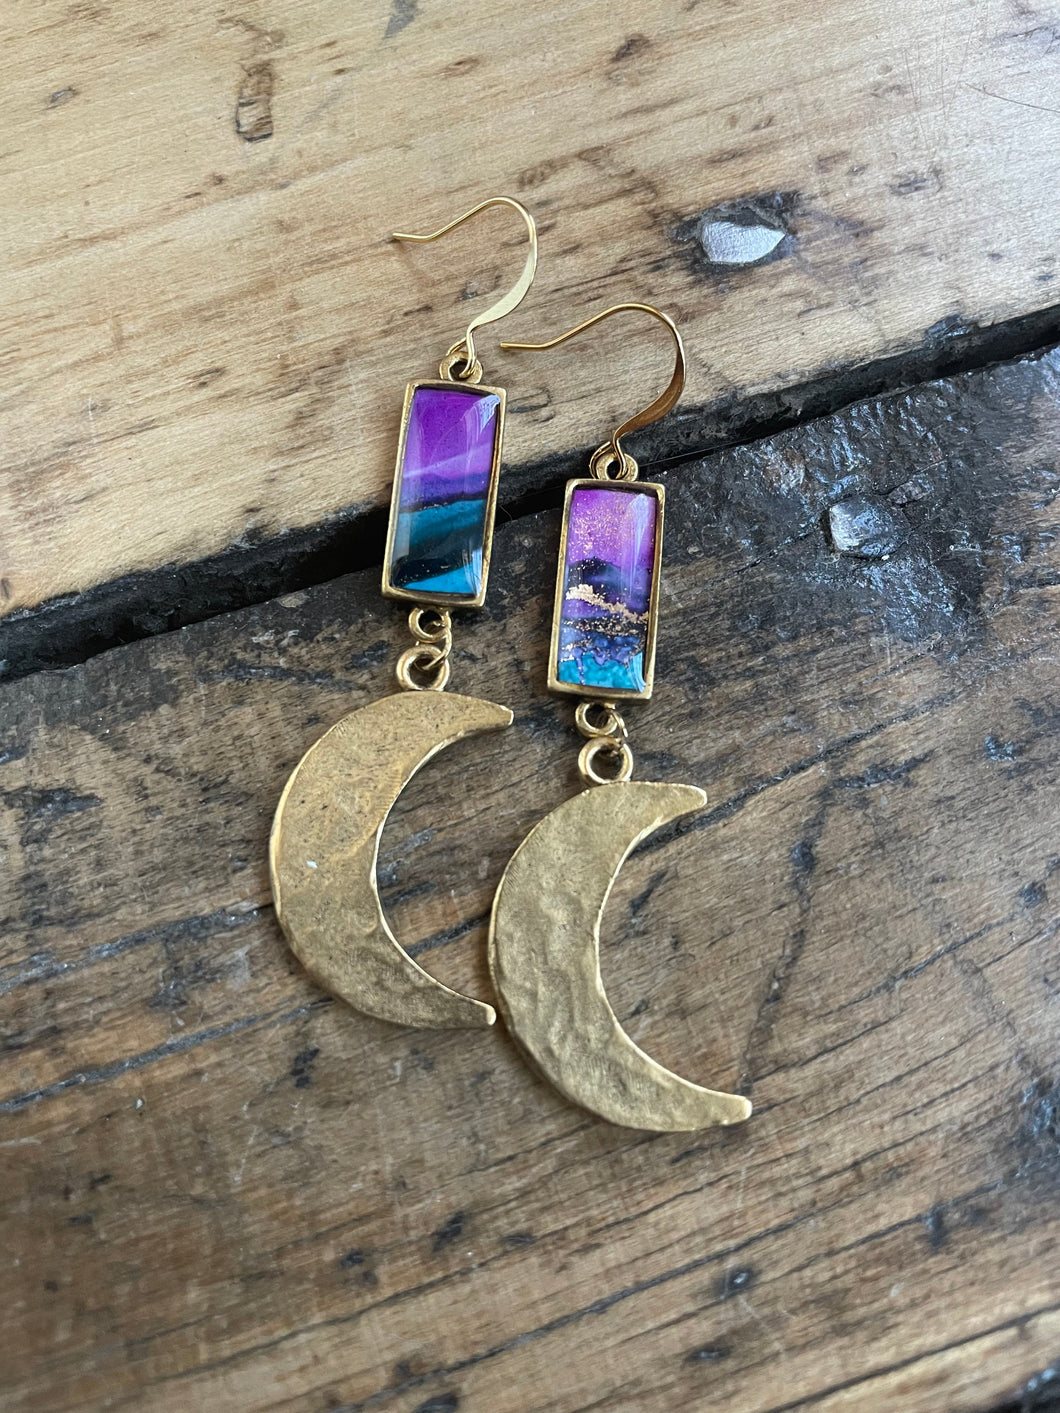 Alcohol Ink Earrings | 2.25” Antiqued Gold Rectangle | Purple, Blue Moon Charm | Handmade